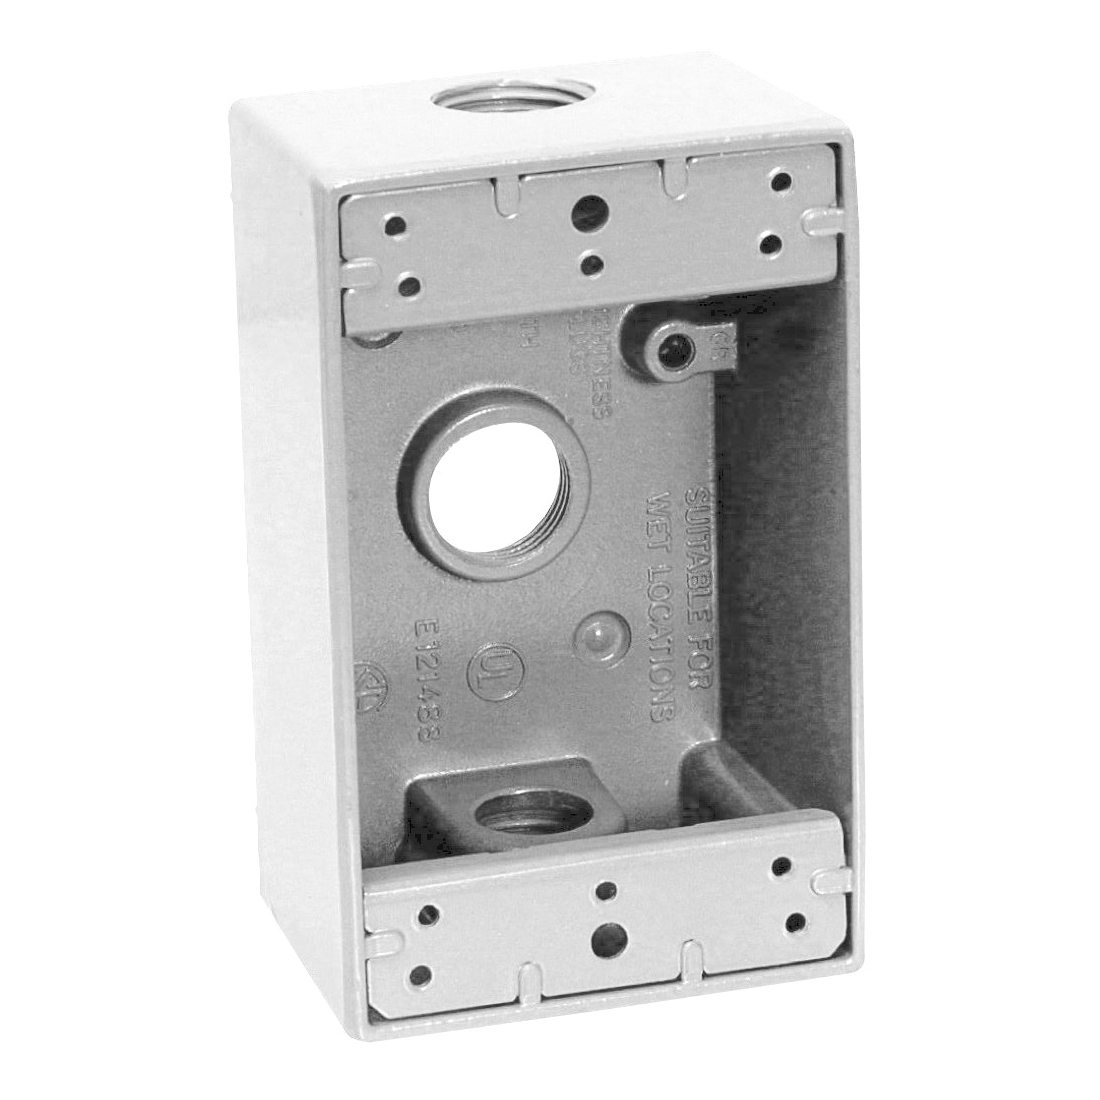 TEDDICO/BWF 1503W-1 Outlet Box, 1-Gang, 3-Knockout, 3-1/2 in Knockout, Metal, White, Powder-Coated - 1